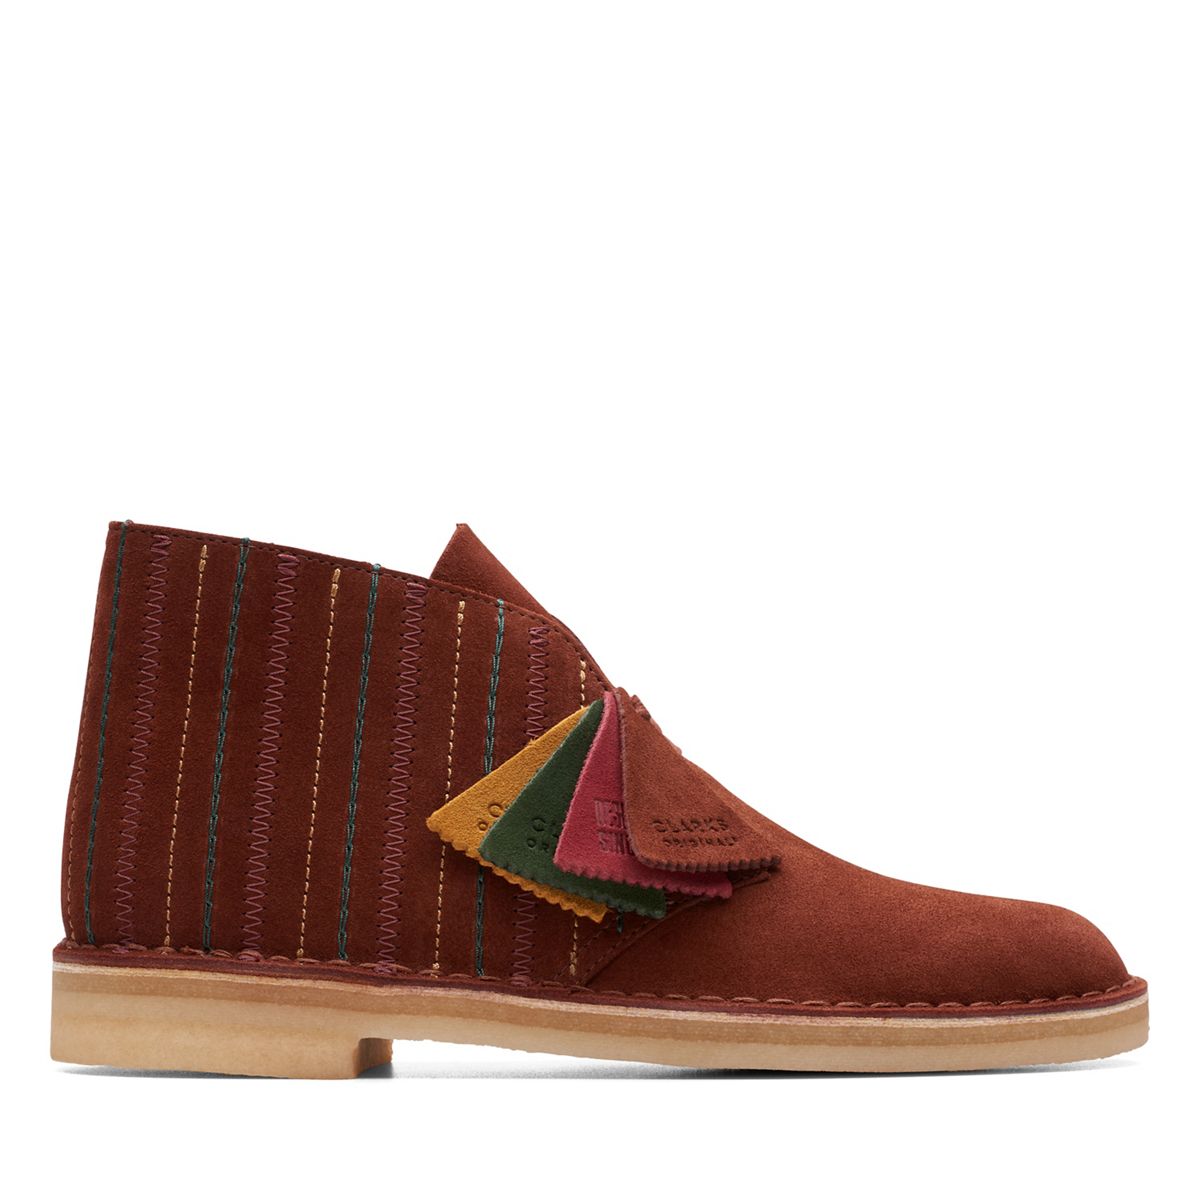 Desert Boot Clarks Canada Site | Clarks Shoes